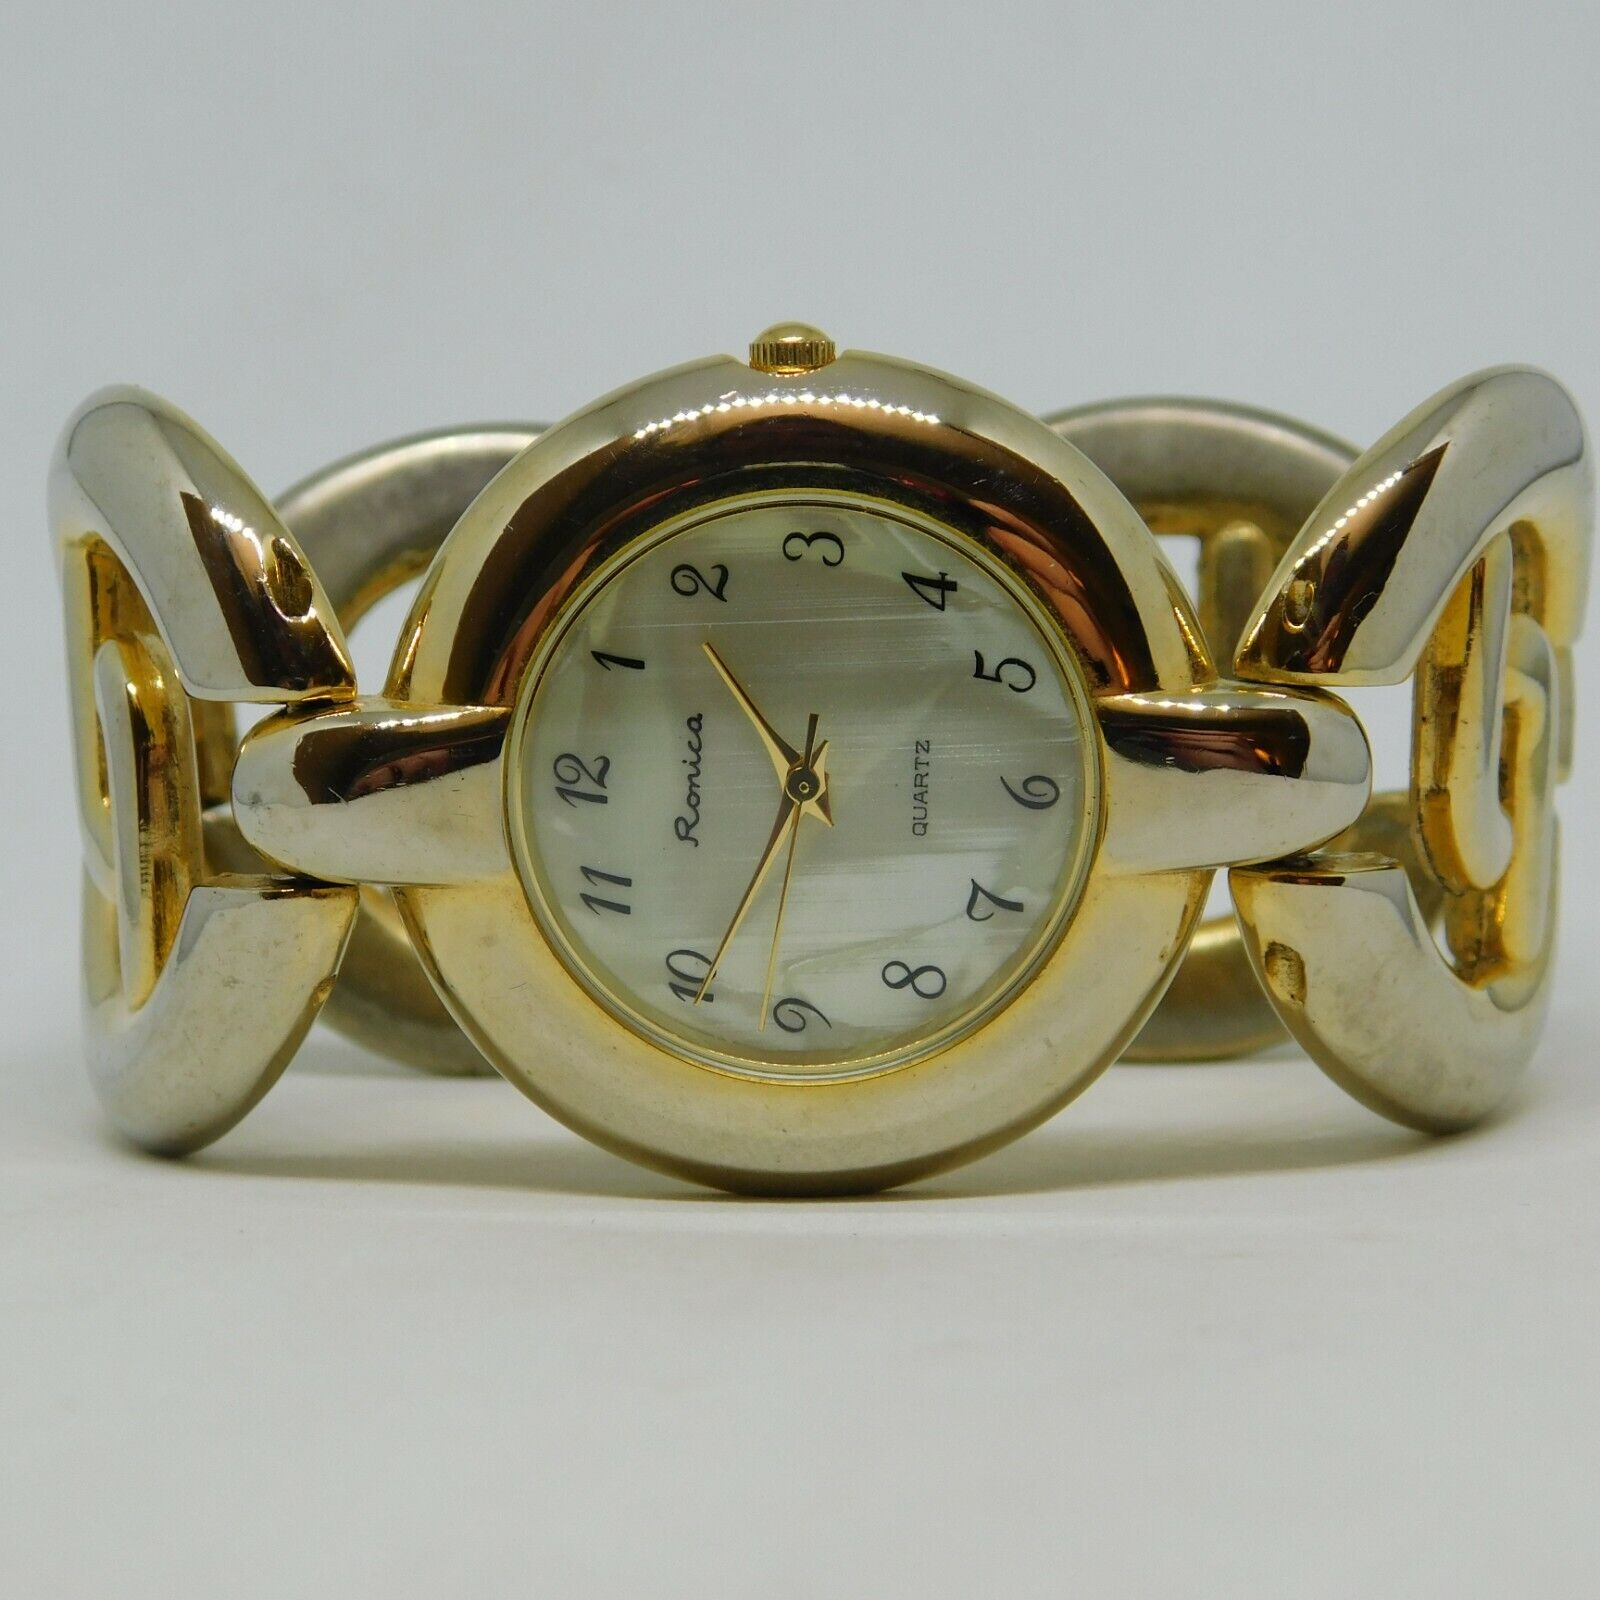 Ronica Gold Tone Mother of Pearl Dial Quartz Analog Women's Watch Sz. 6"